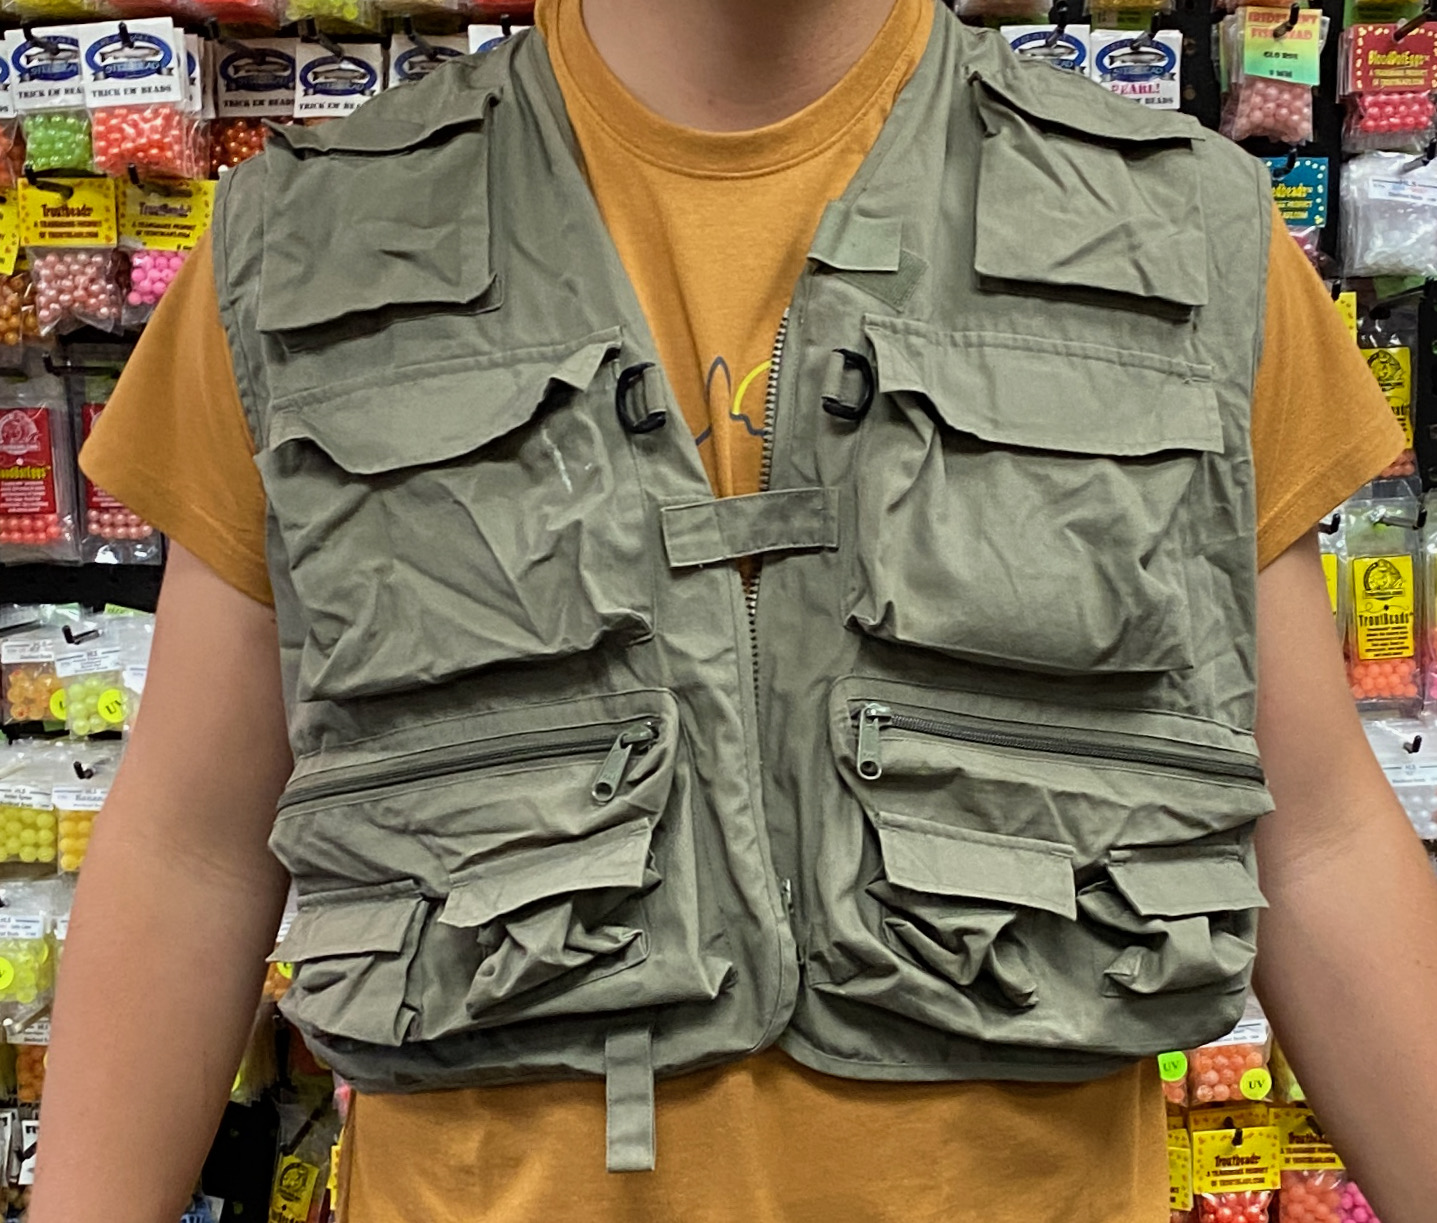 SOLD! – Orvis Fly Fishing Vest – Size XL – GREAT SHAPE! – $25